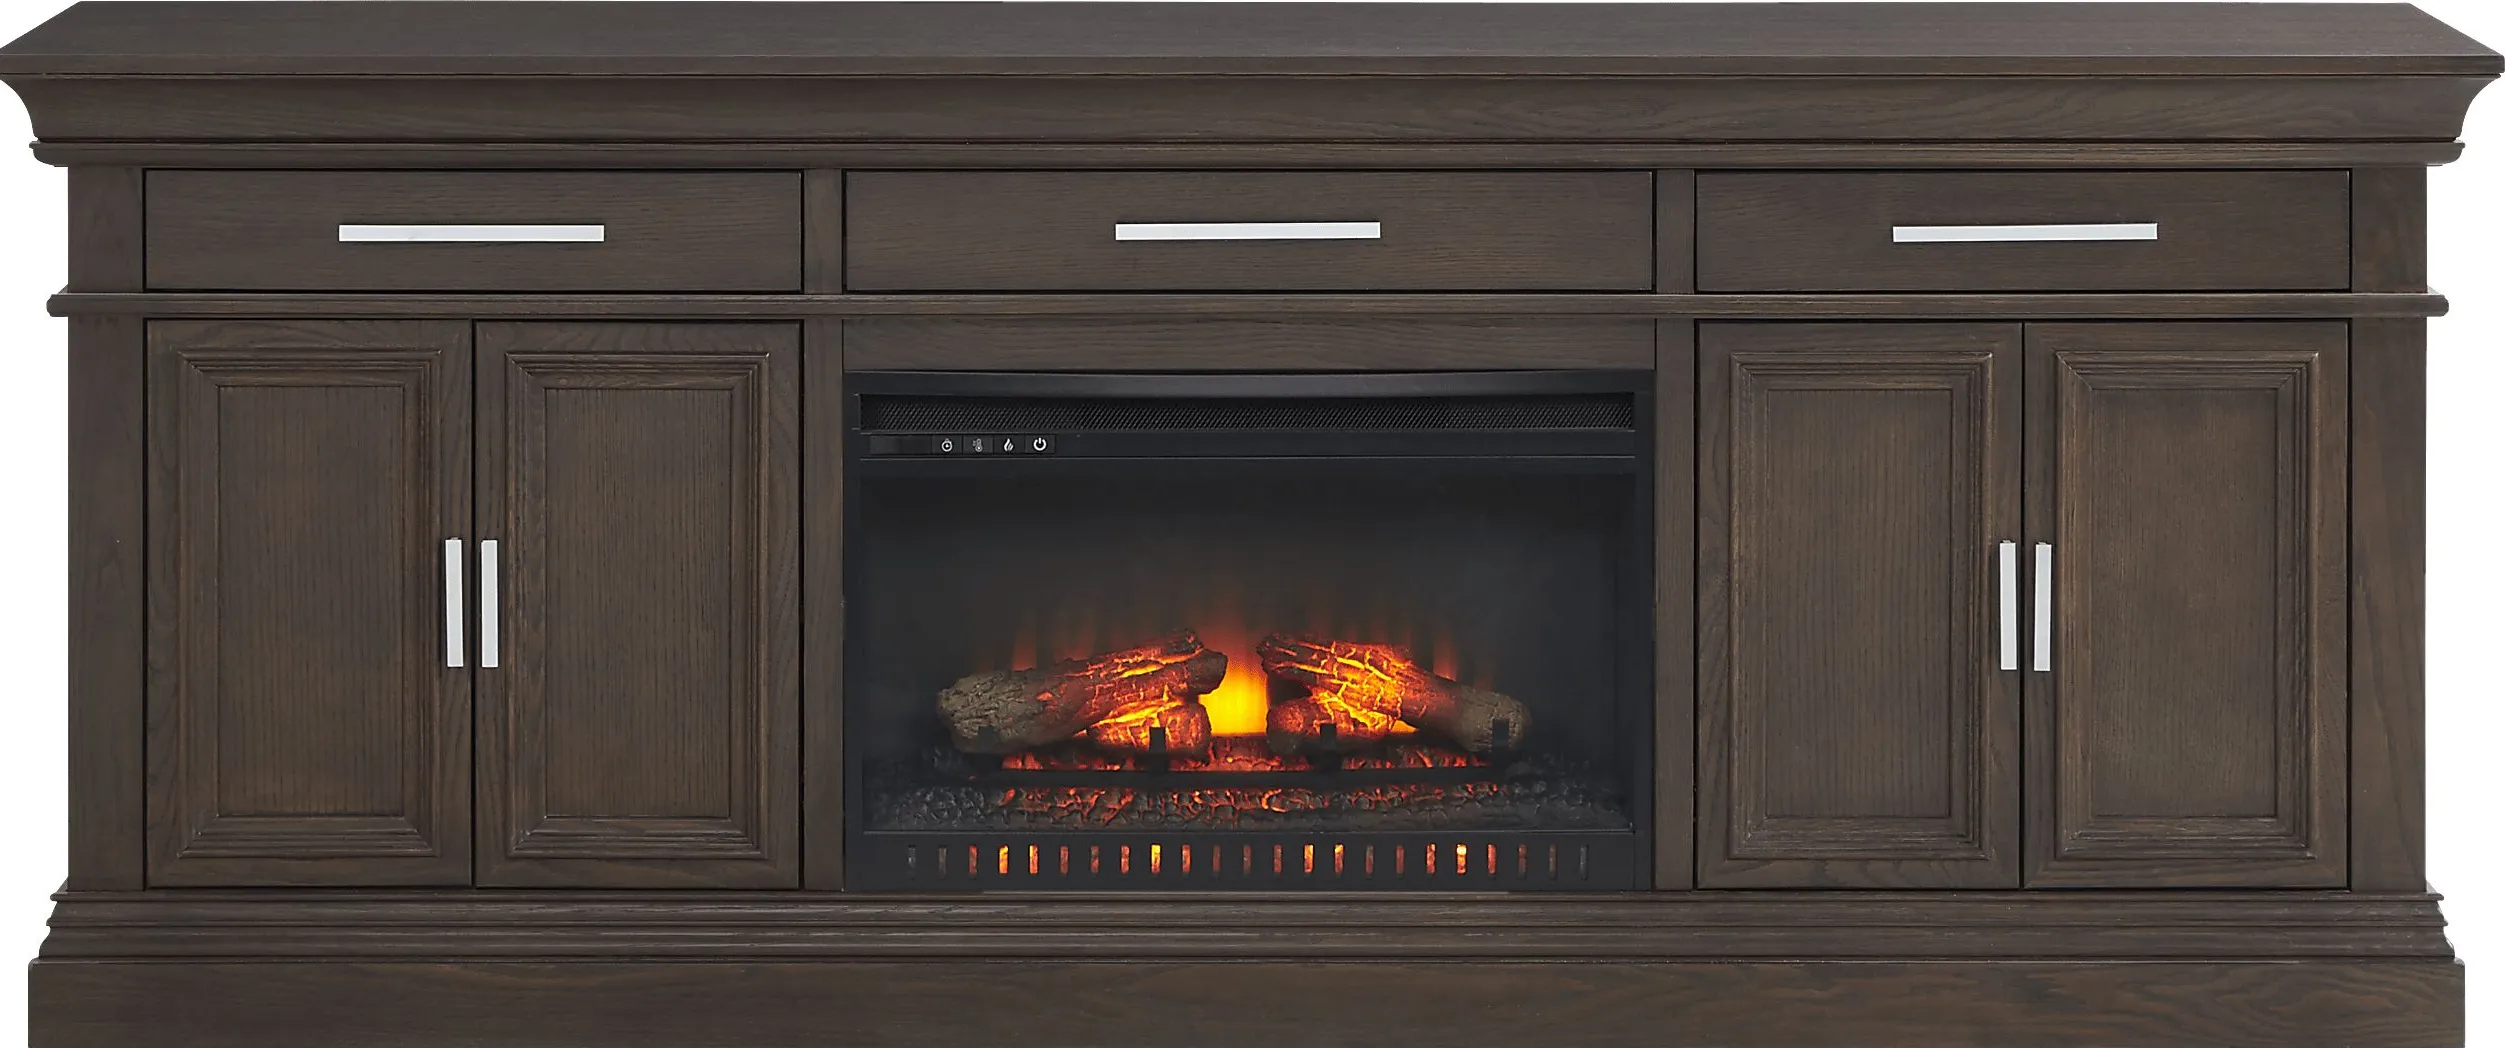 Brightwood Brown 82 in. Console with Electric Log Fireplace